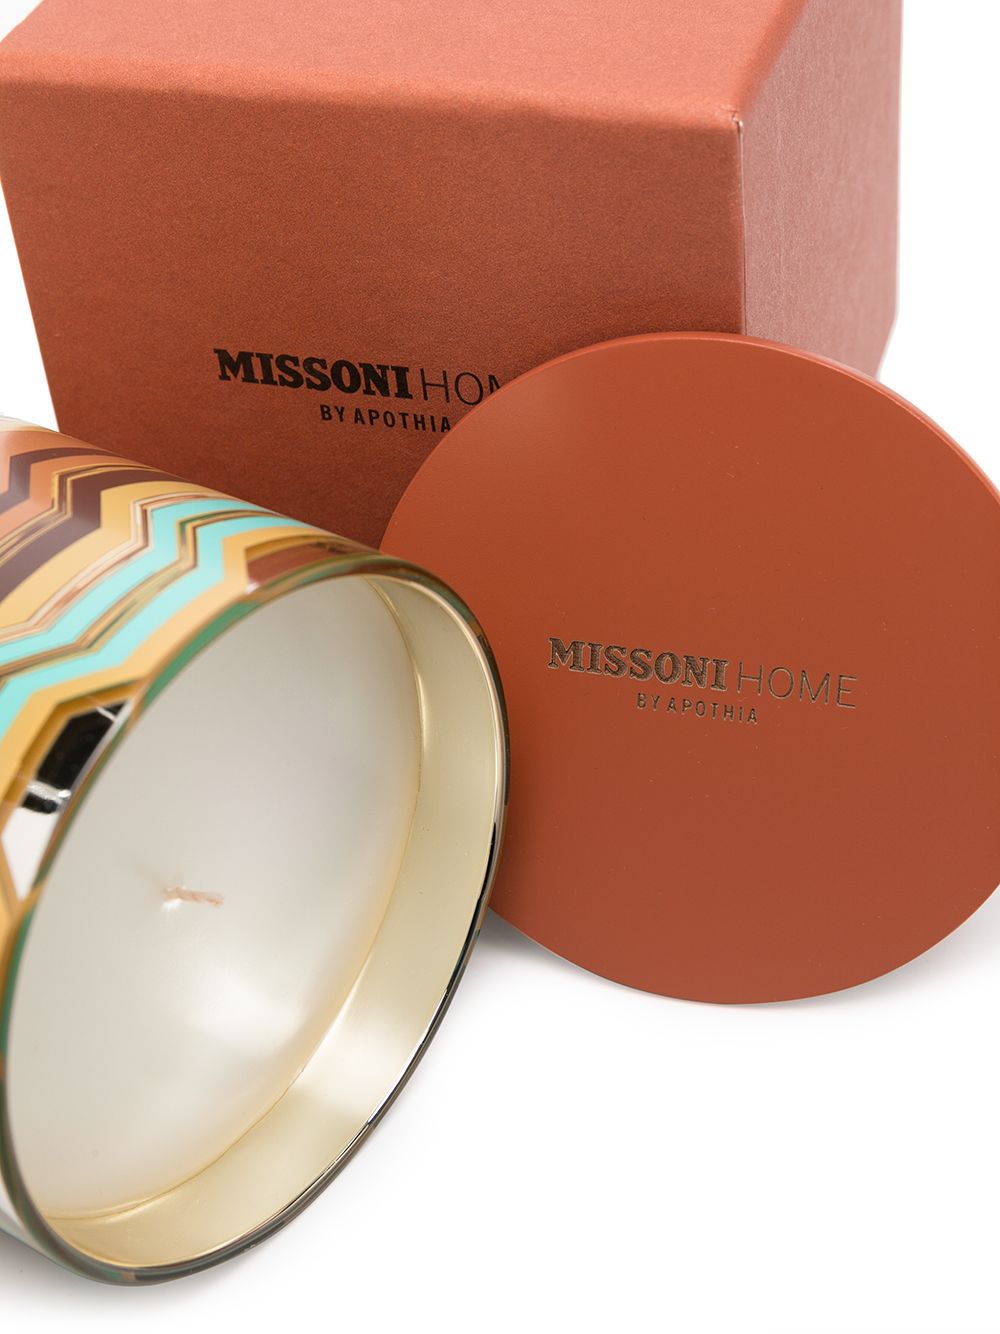 Missoni Home | Maremma Scented Candle by Apothia